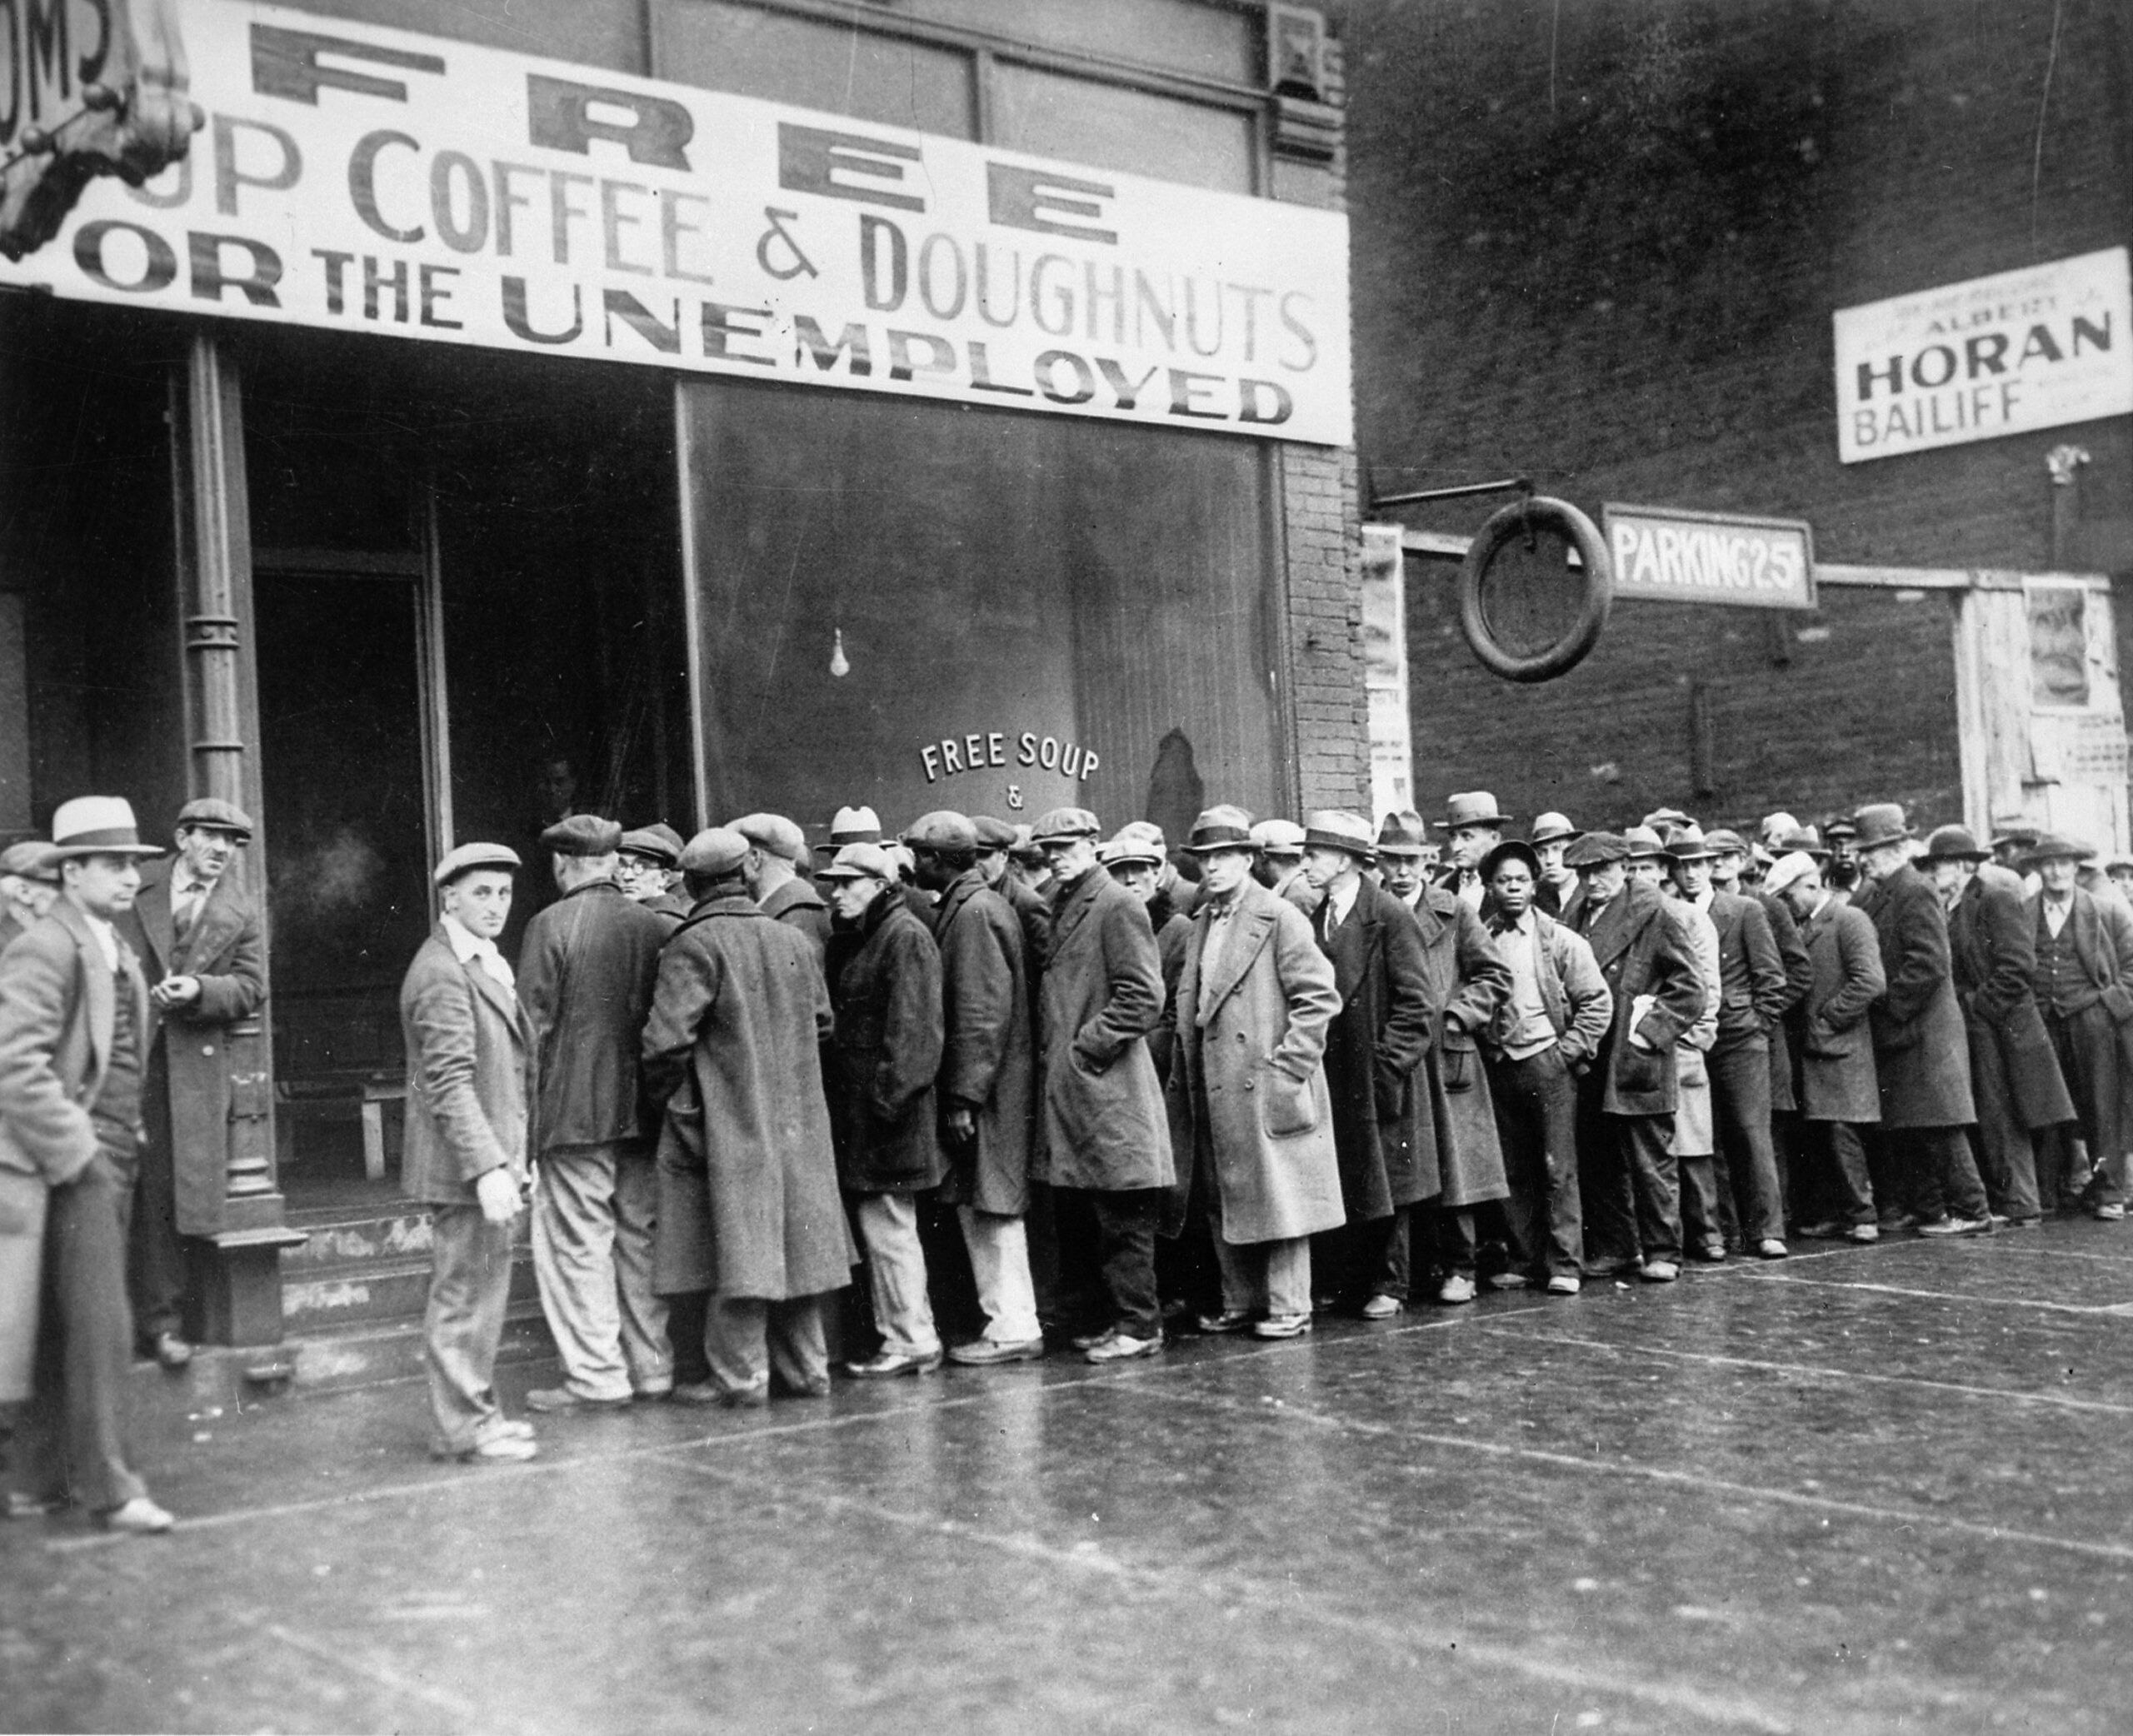 Black and white photo of men standing in line waiting for food during the Great Depression.